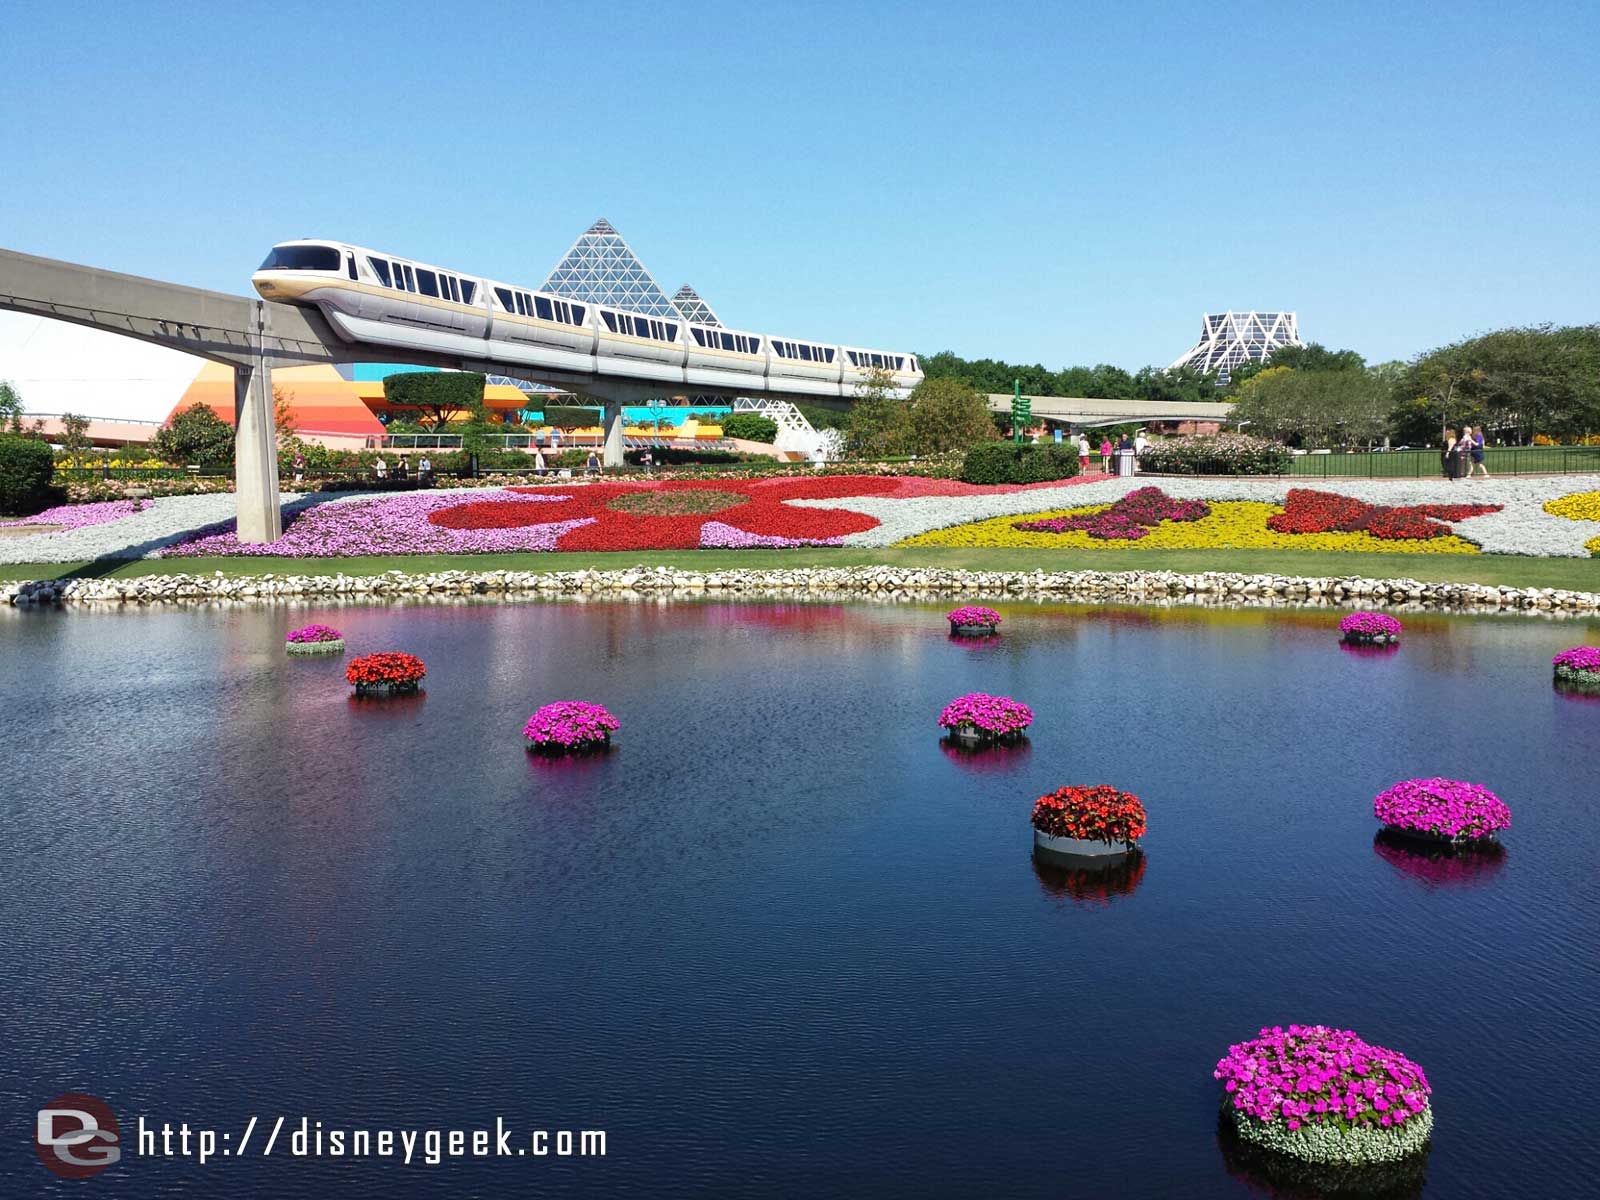 Monorail passing over the floating baskets and large flower beds of Future World - Epcot International Flower & Garden Festival